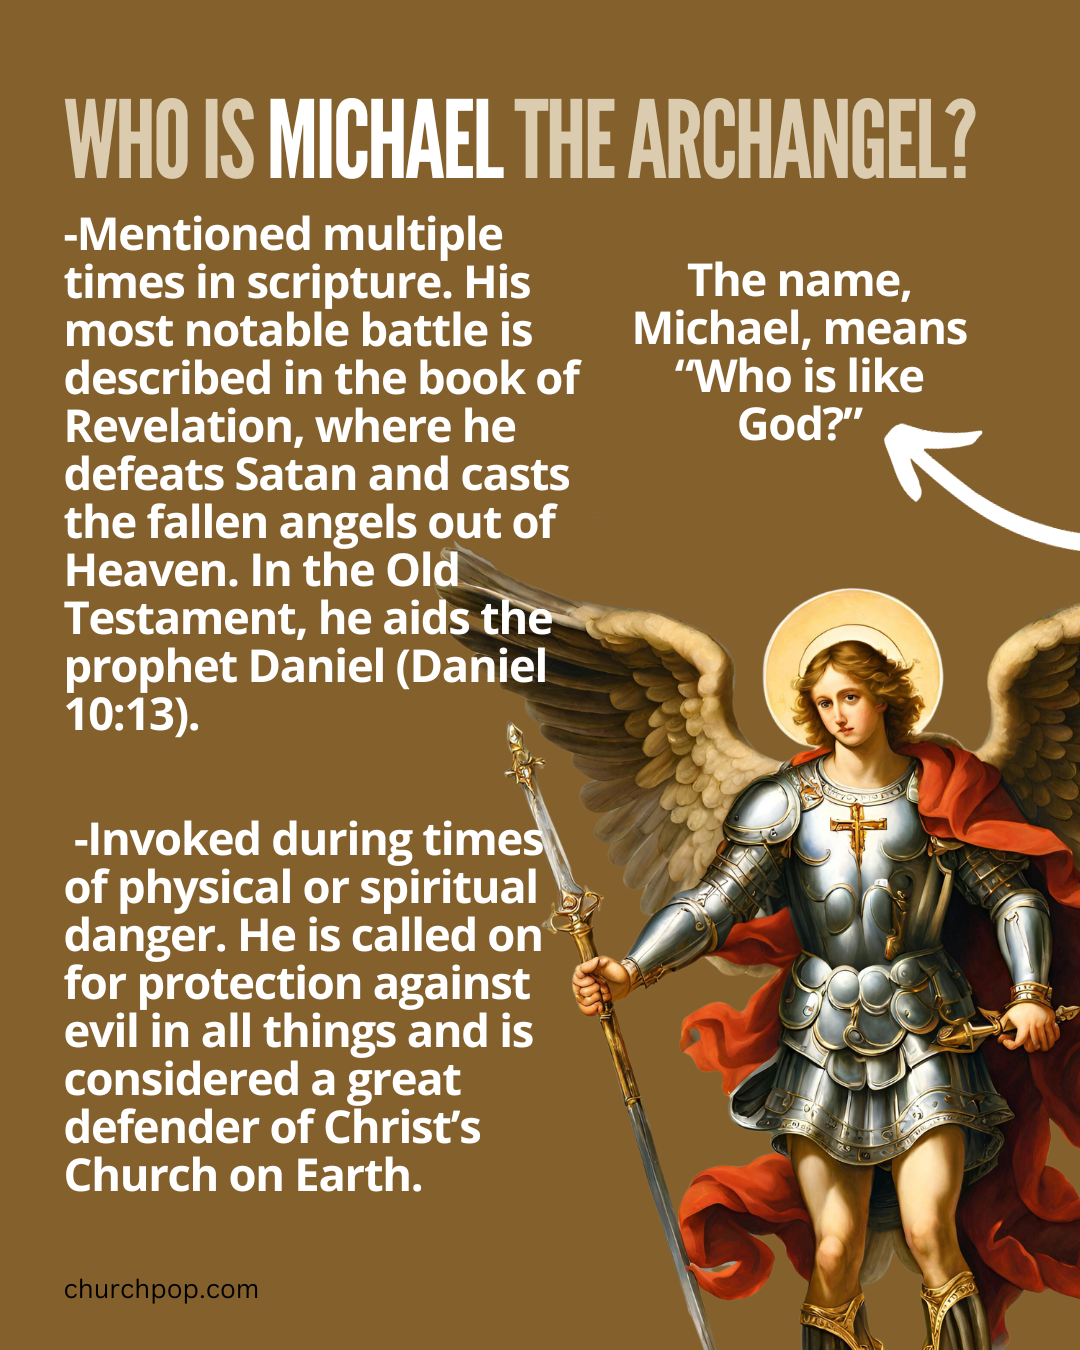 Your Go-To Guide for the 3 Archangels: Handy Facts Every Catholic Should Know